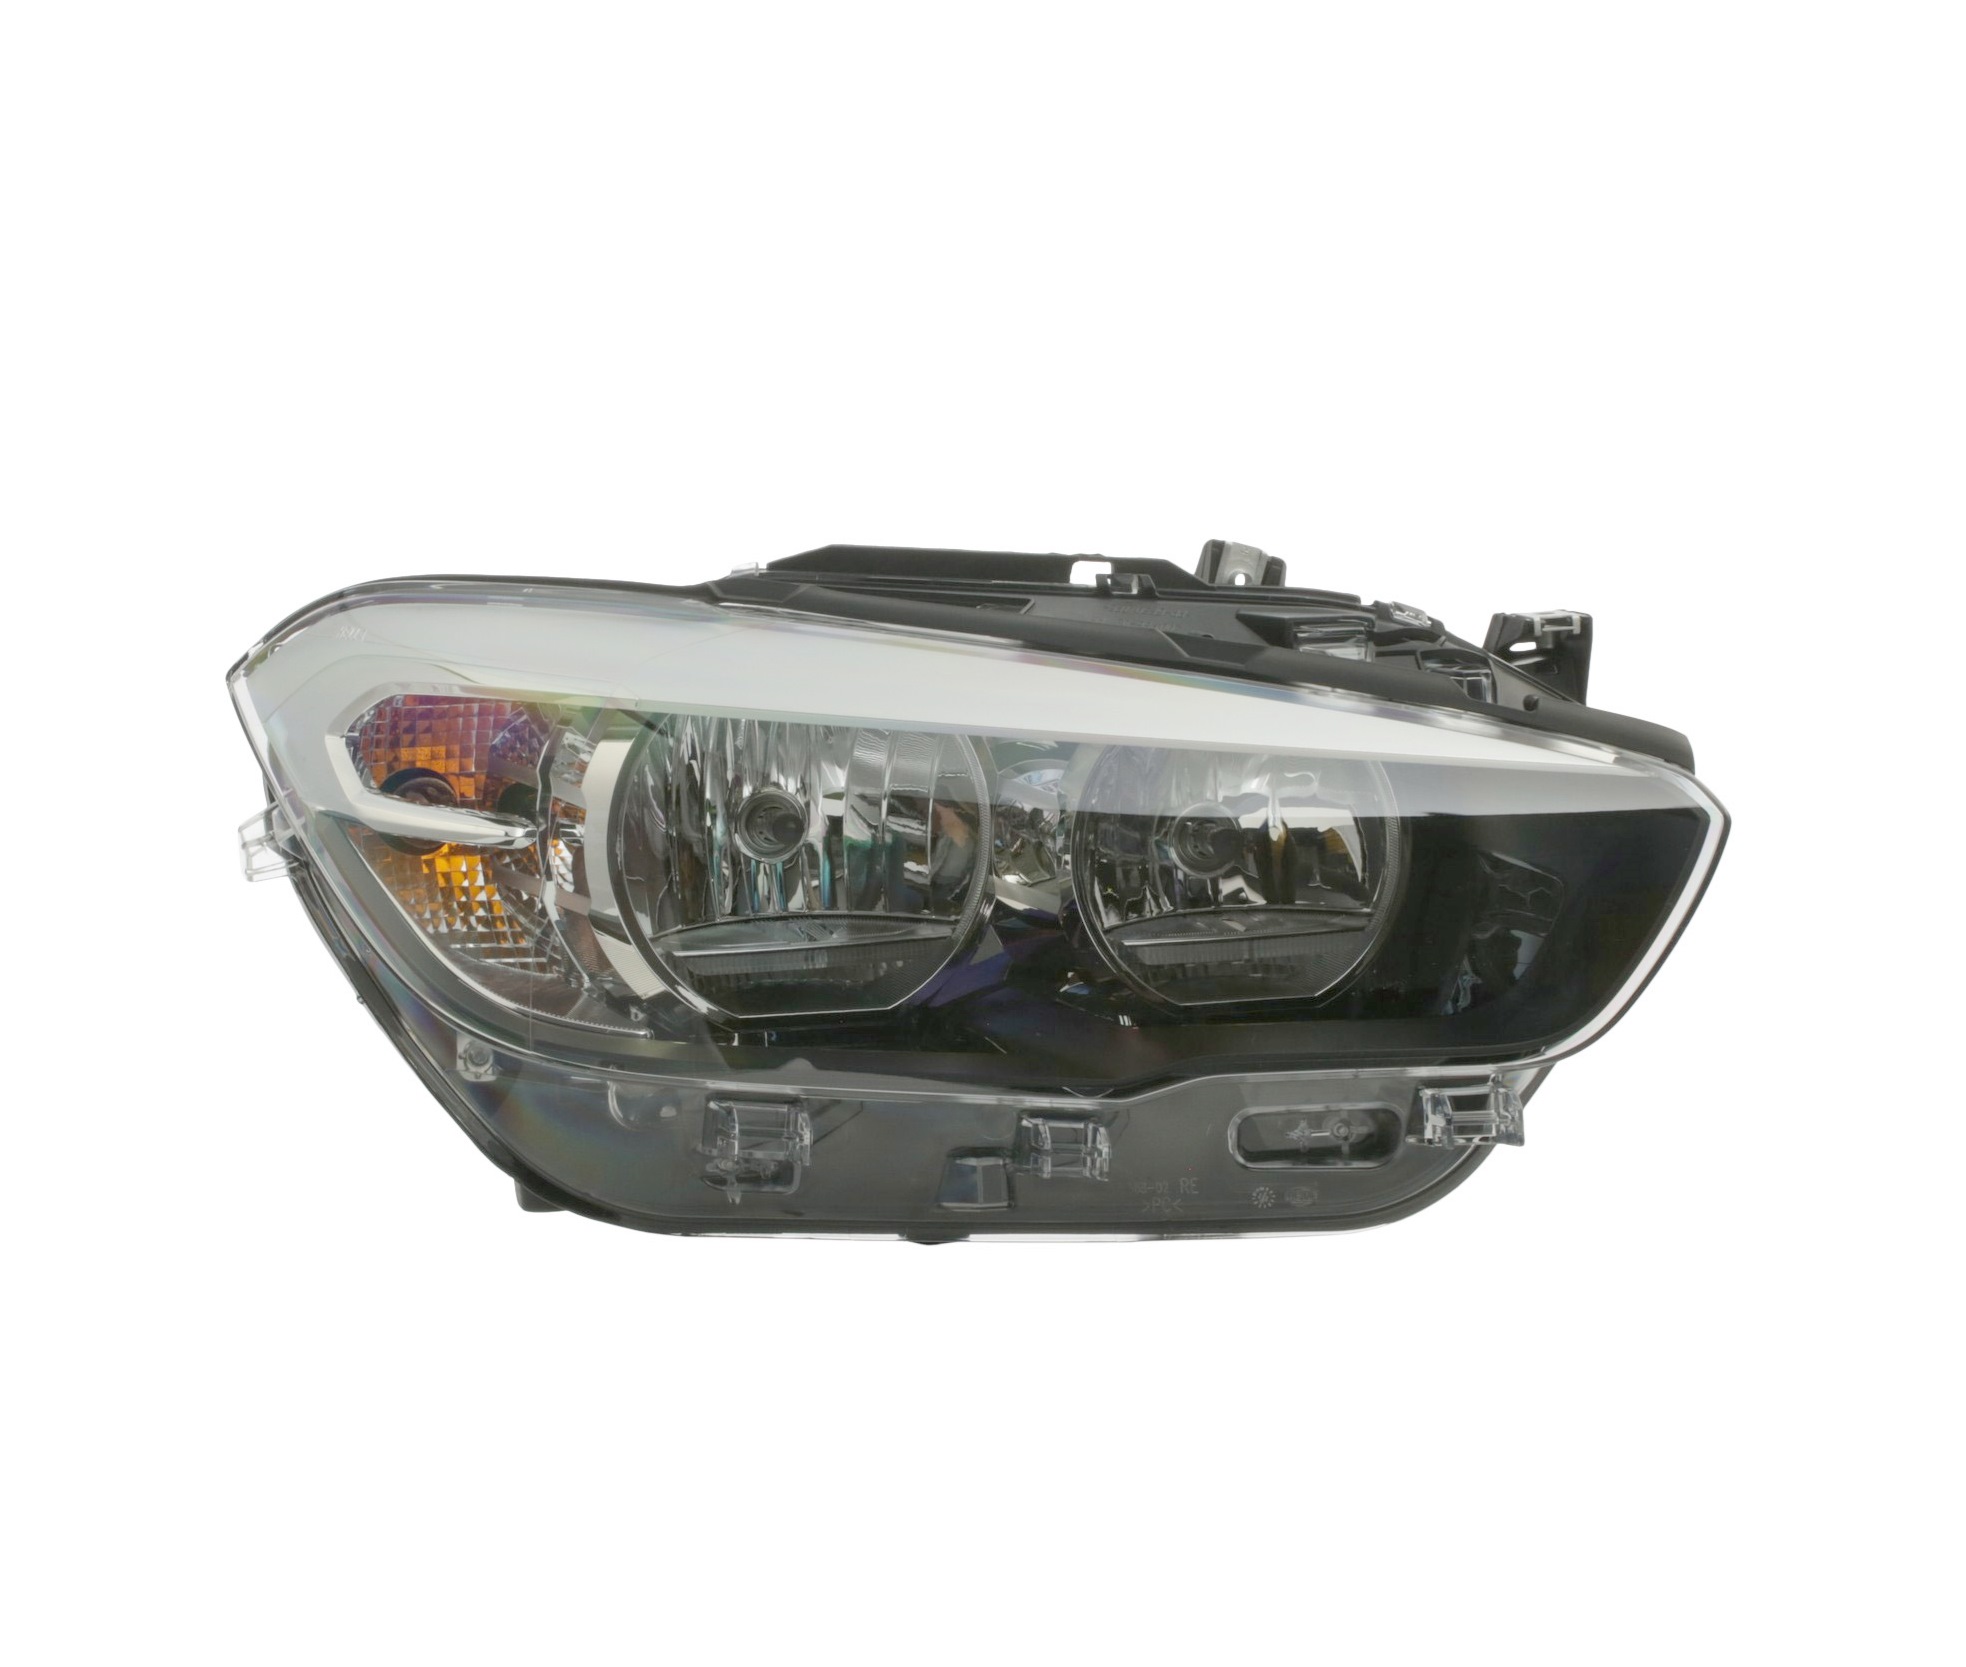 HELLA 1EG 011 919-421 Headlight Right, H7/H7, PY21W, Halogen, 12V, with indicator, with low beam, with daytime running light (LED), with position light, with high beam, for right-hand traffic, with motor for headlamp levelling, with bulbs